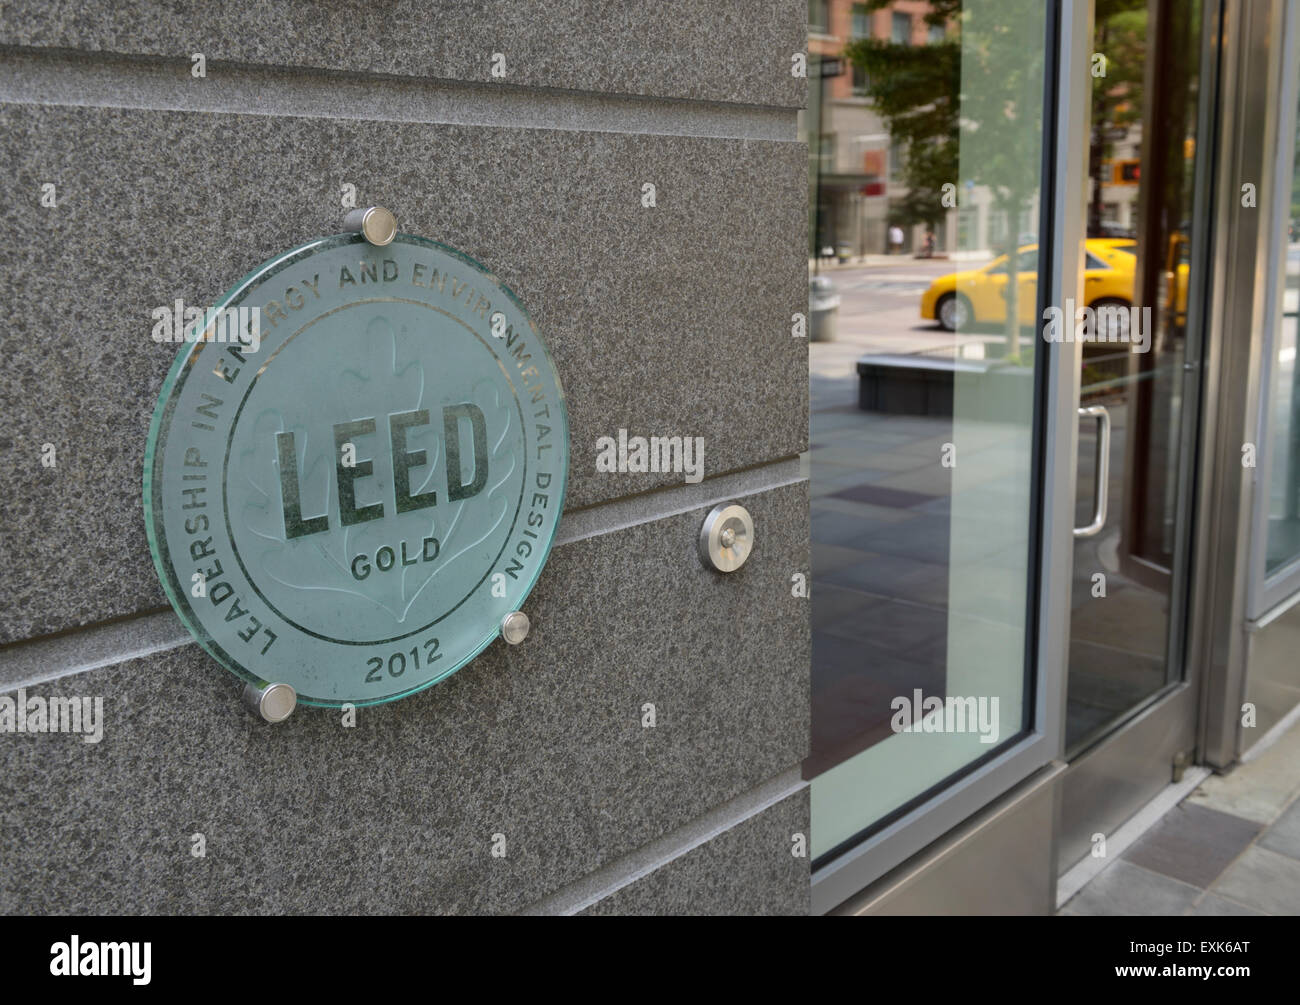 LEED gold rating sign for environmental efficiency on apartment building in NYC, Battery Park City Stock Photo